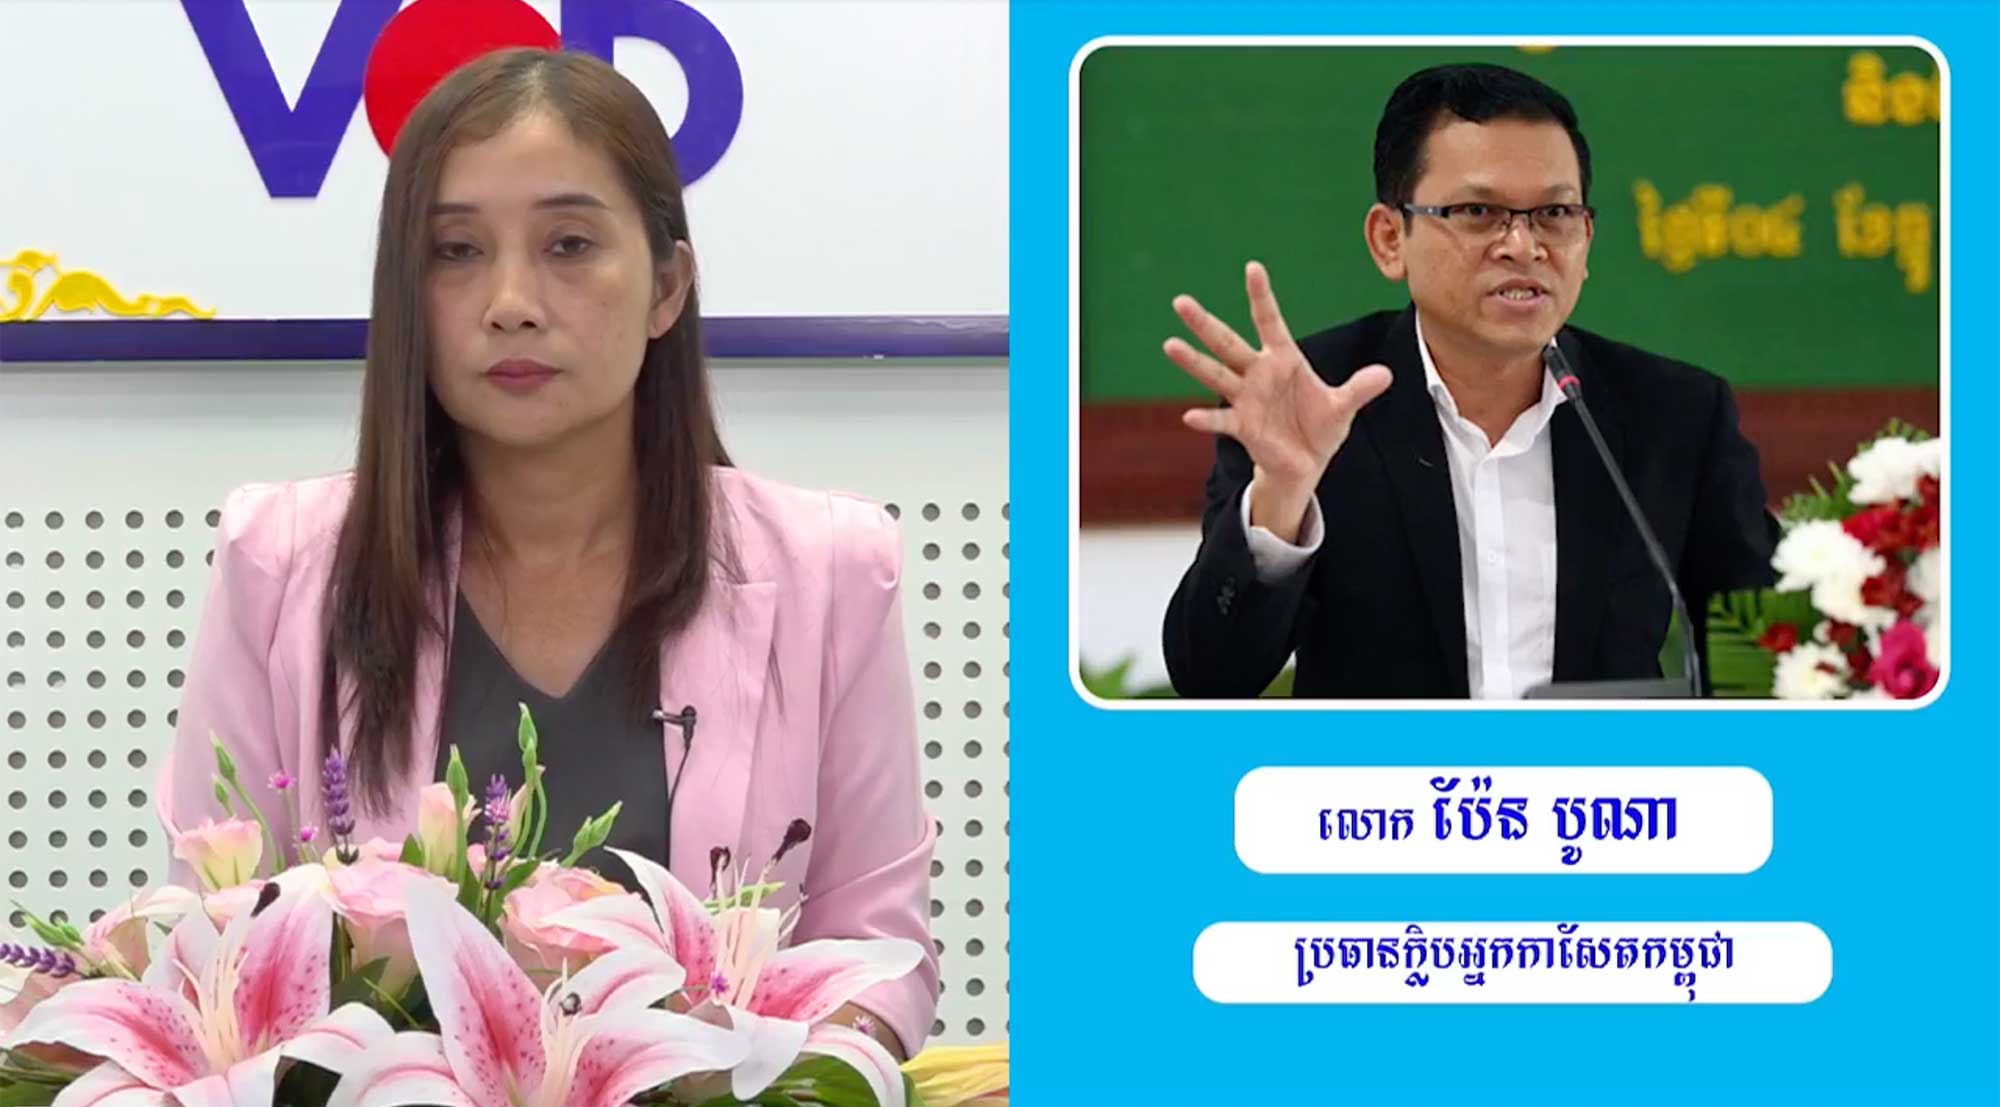 Cambodian Center for Independent Media’s (CCIM) first radio show discussed fake information around COVID-19 and was viewed 9,900 times on Facebook.